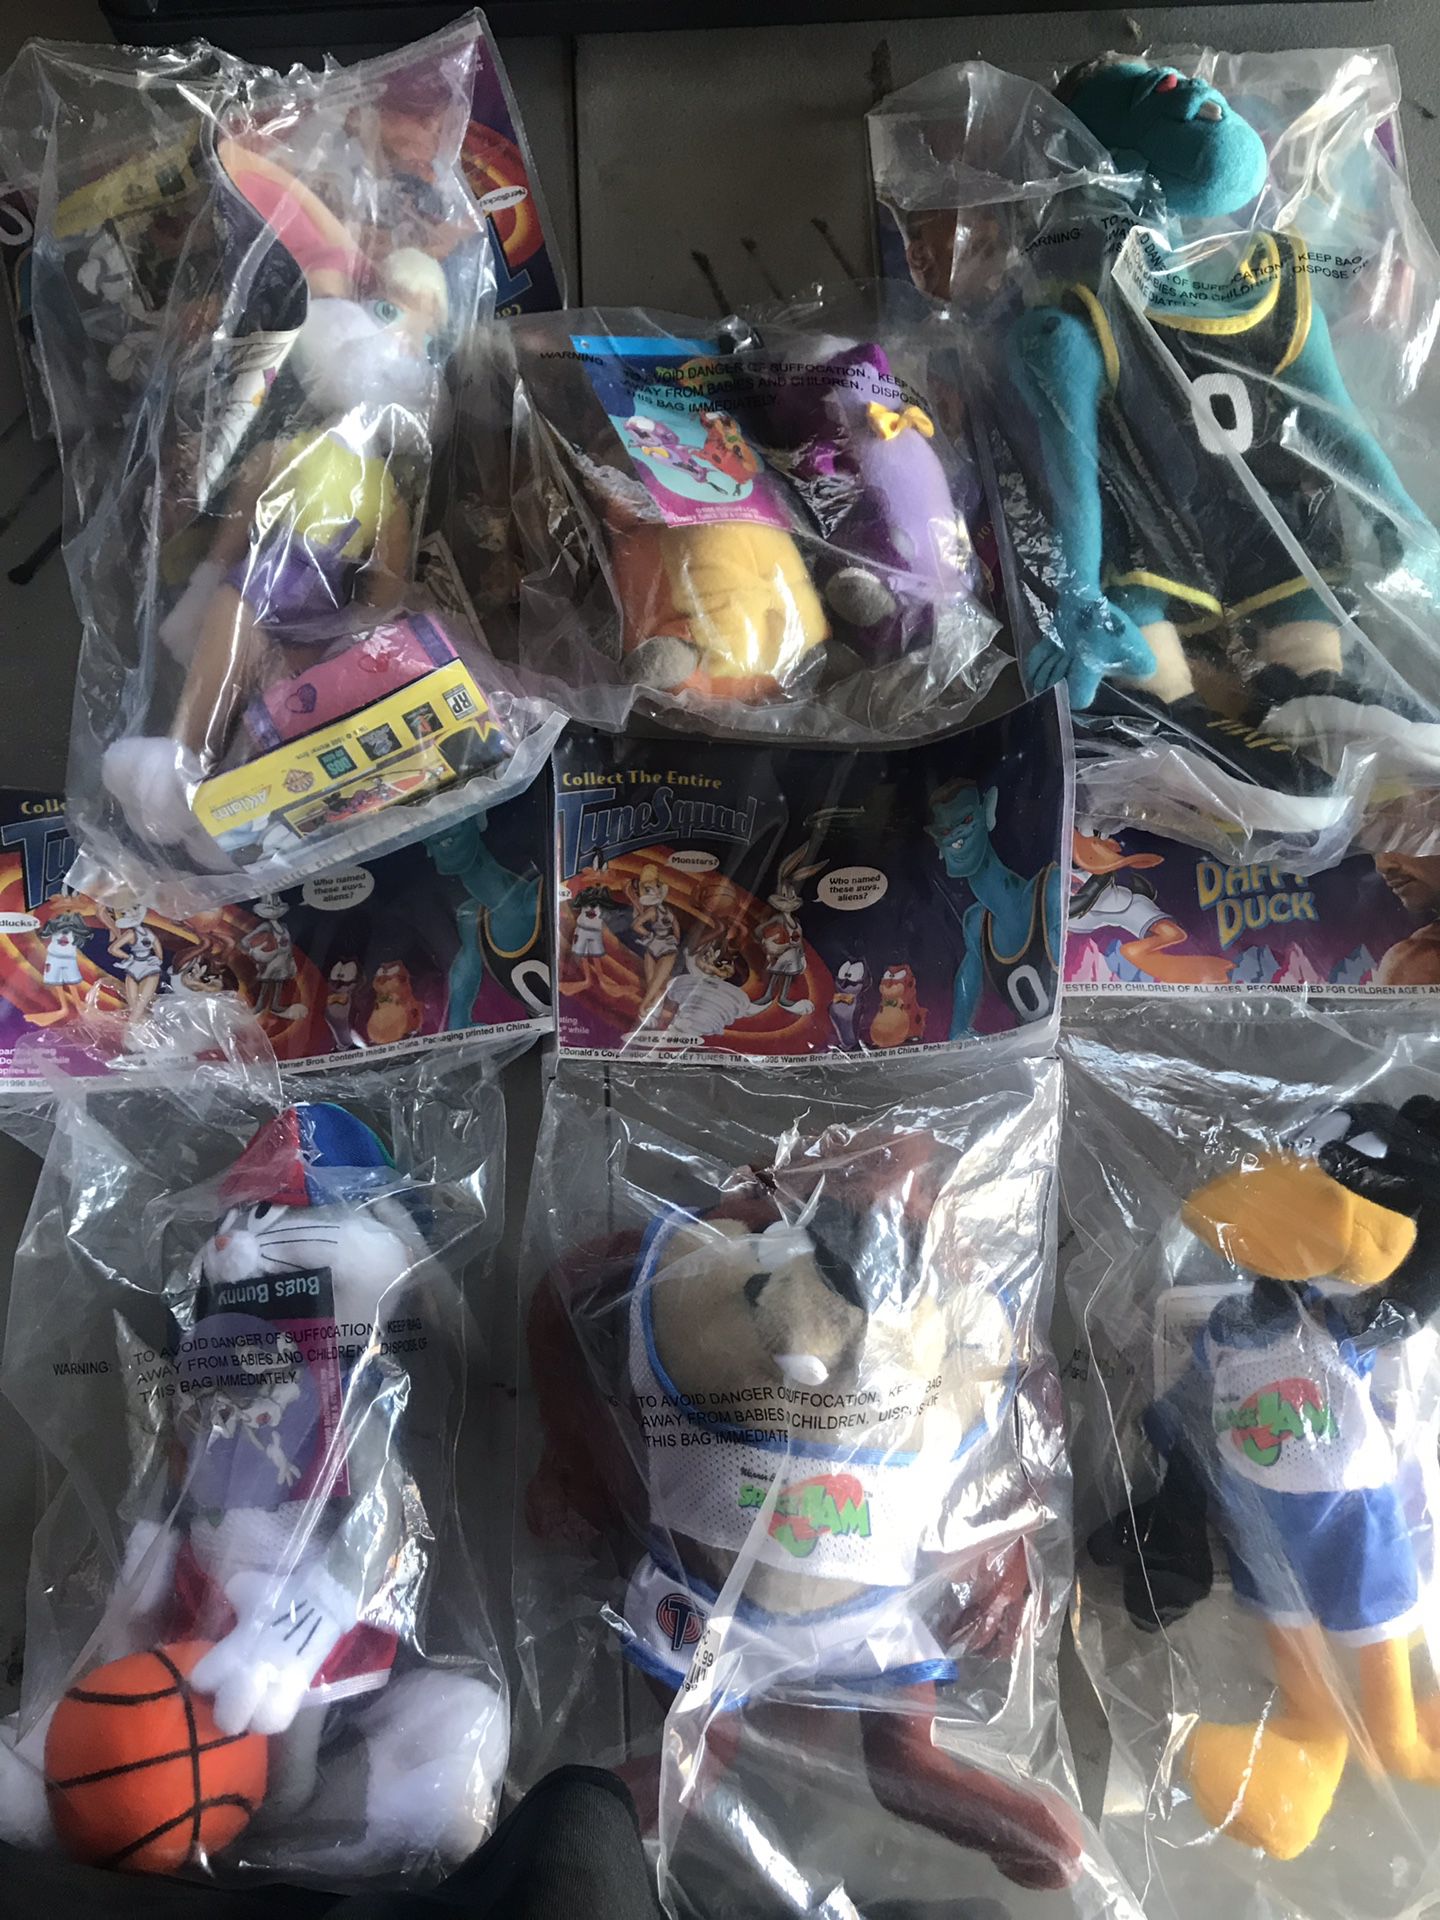 OG SPACE JAM MCDONALDS TOYS COMPLETE COLLECTION